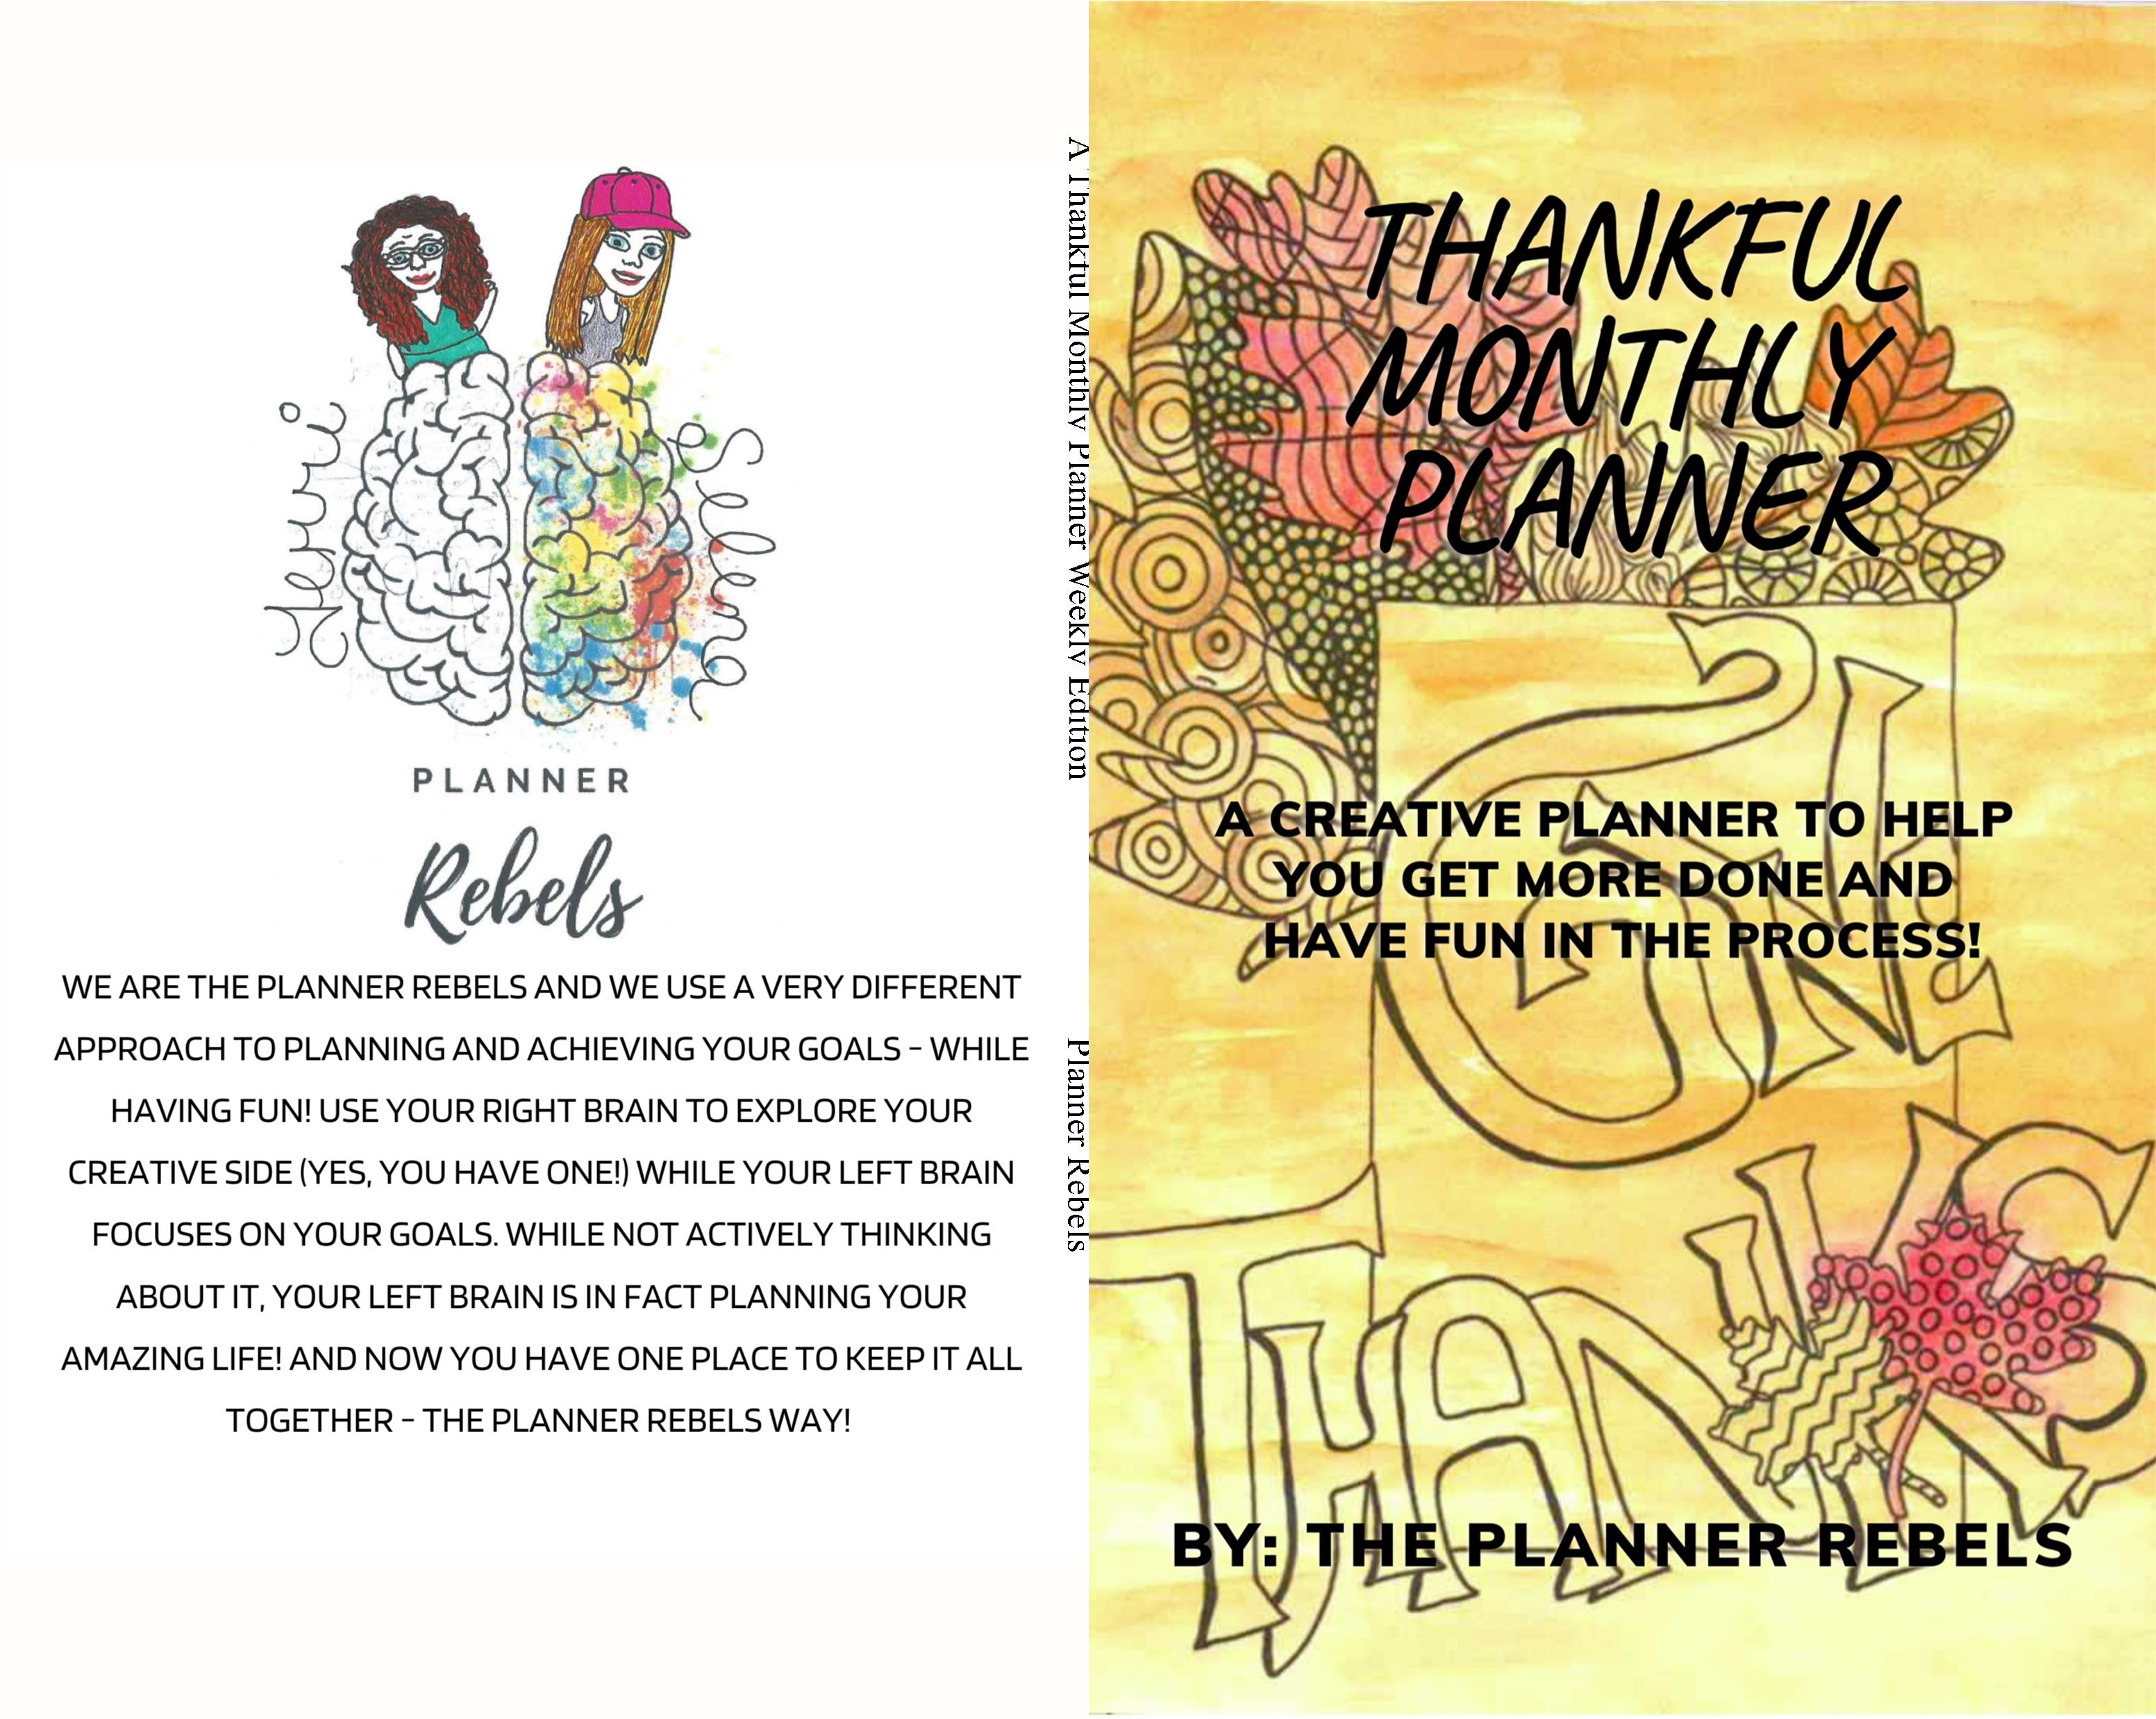 A grateful Monthly Planner Weekly Edition cover image